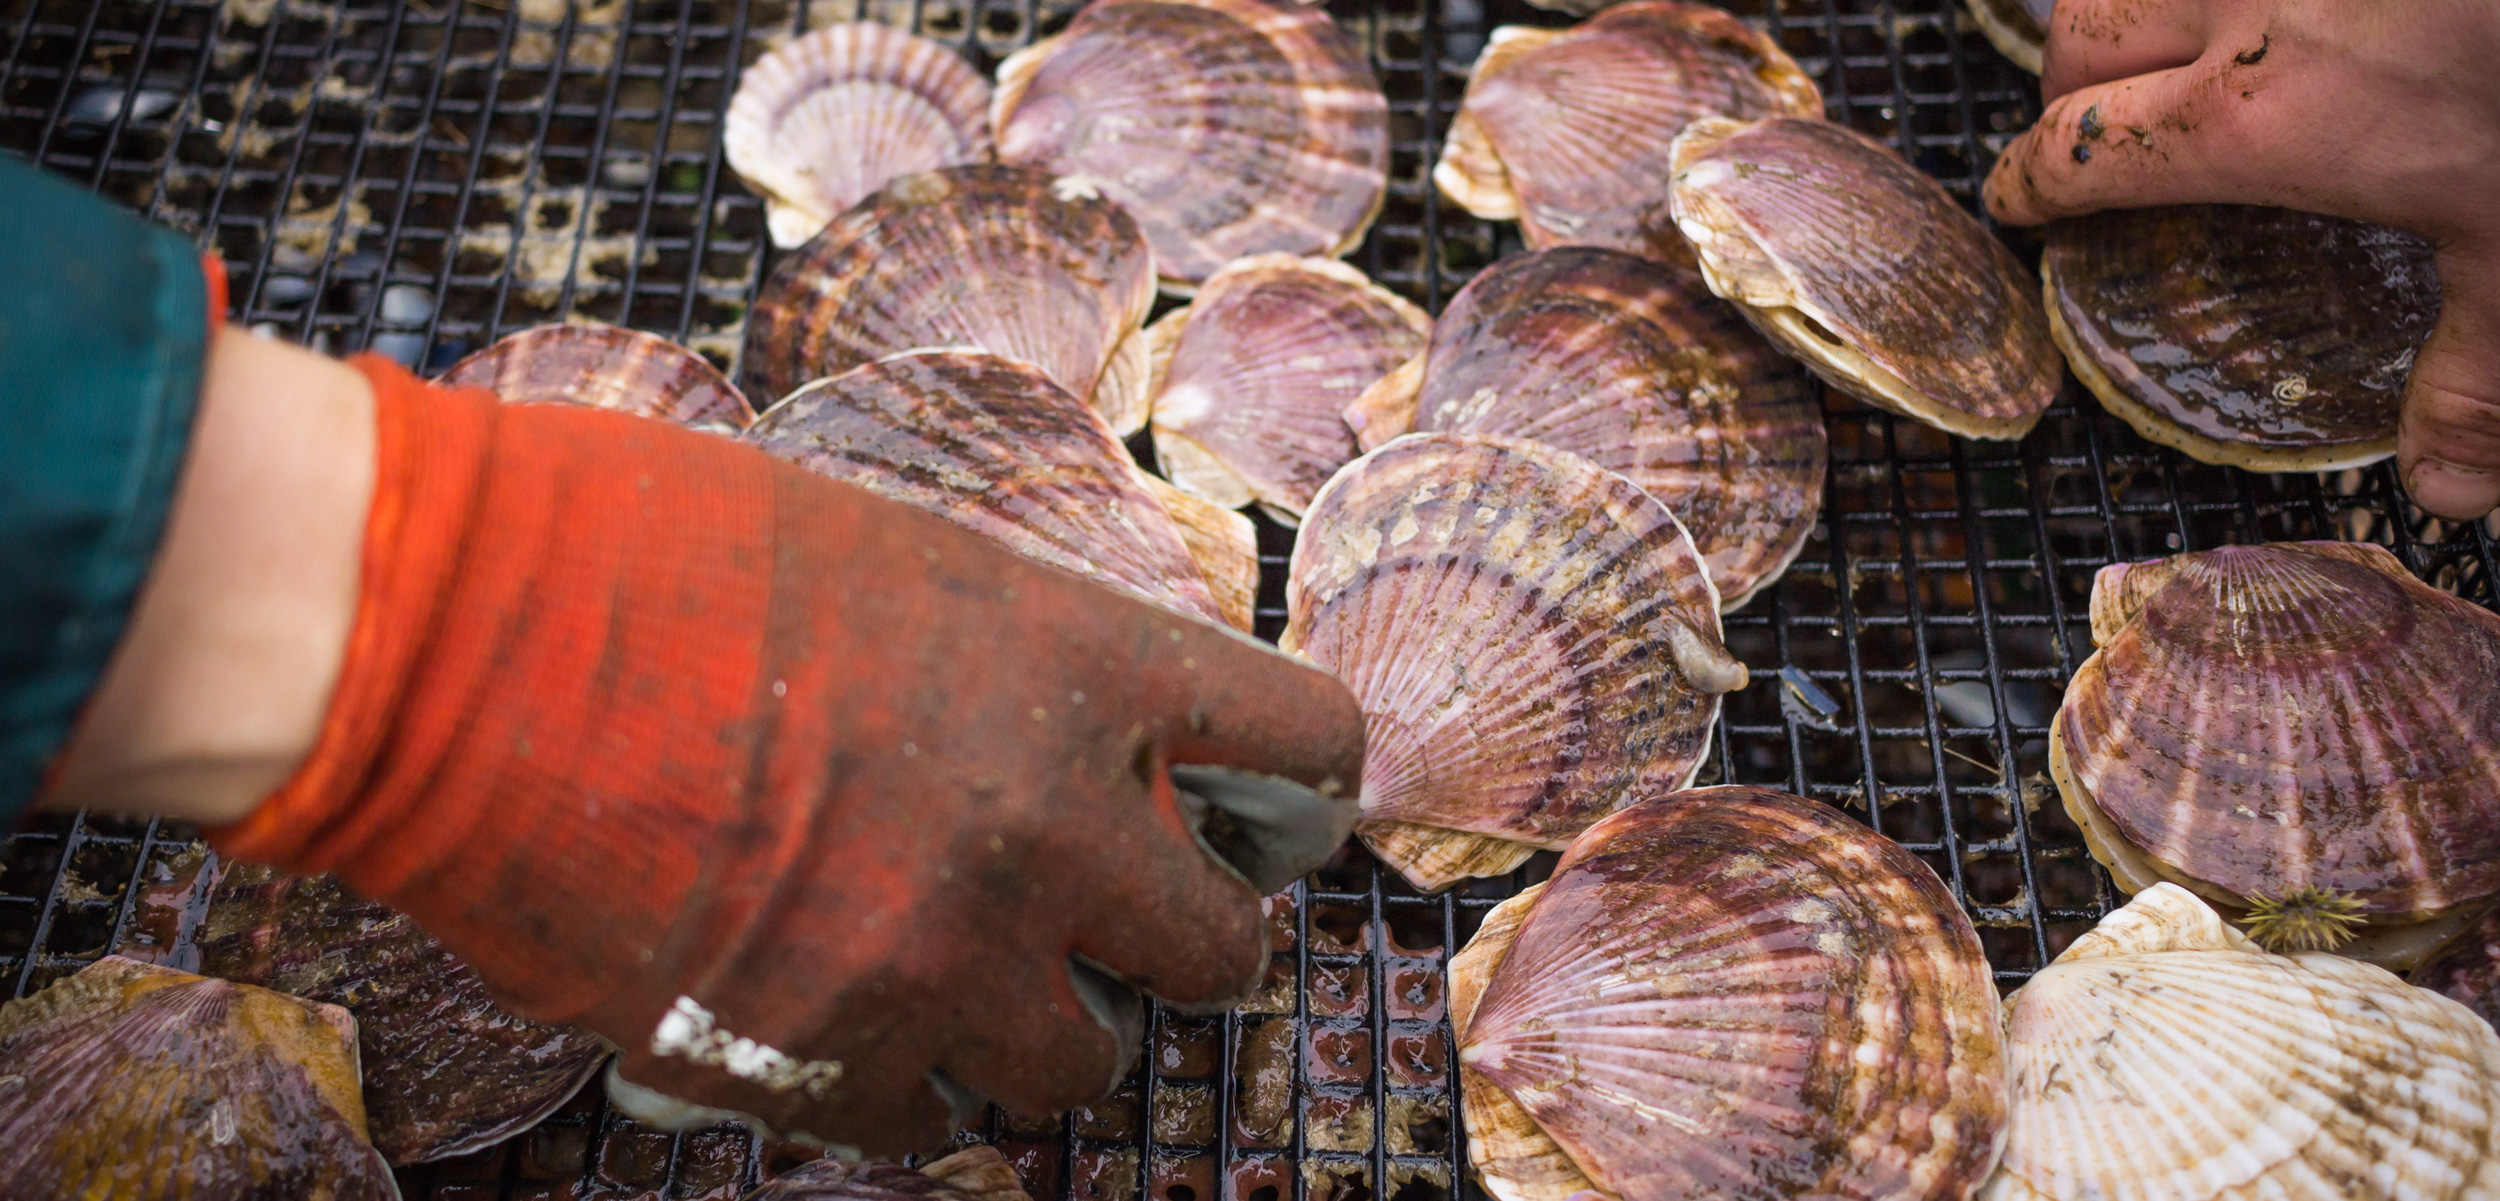 Scallops, like other shellfish, are facing a multitude of threats from climate change. Photo by Josh Silberg